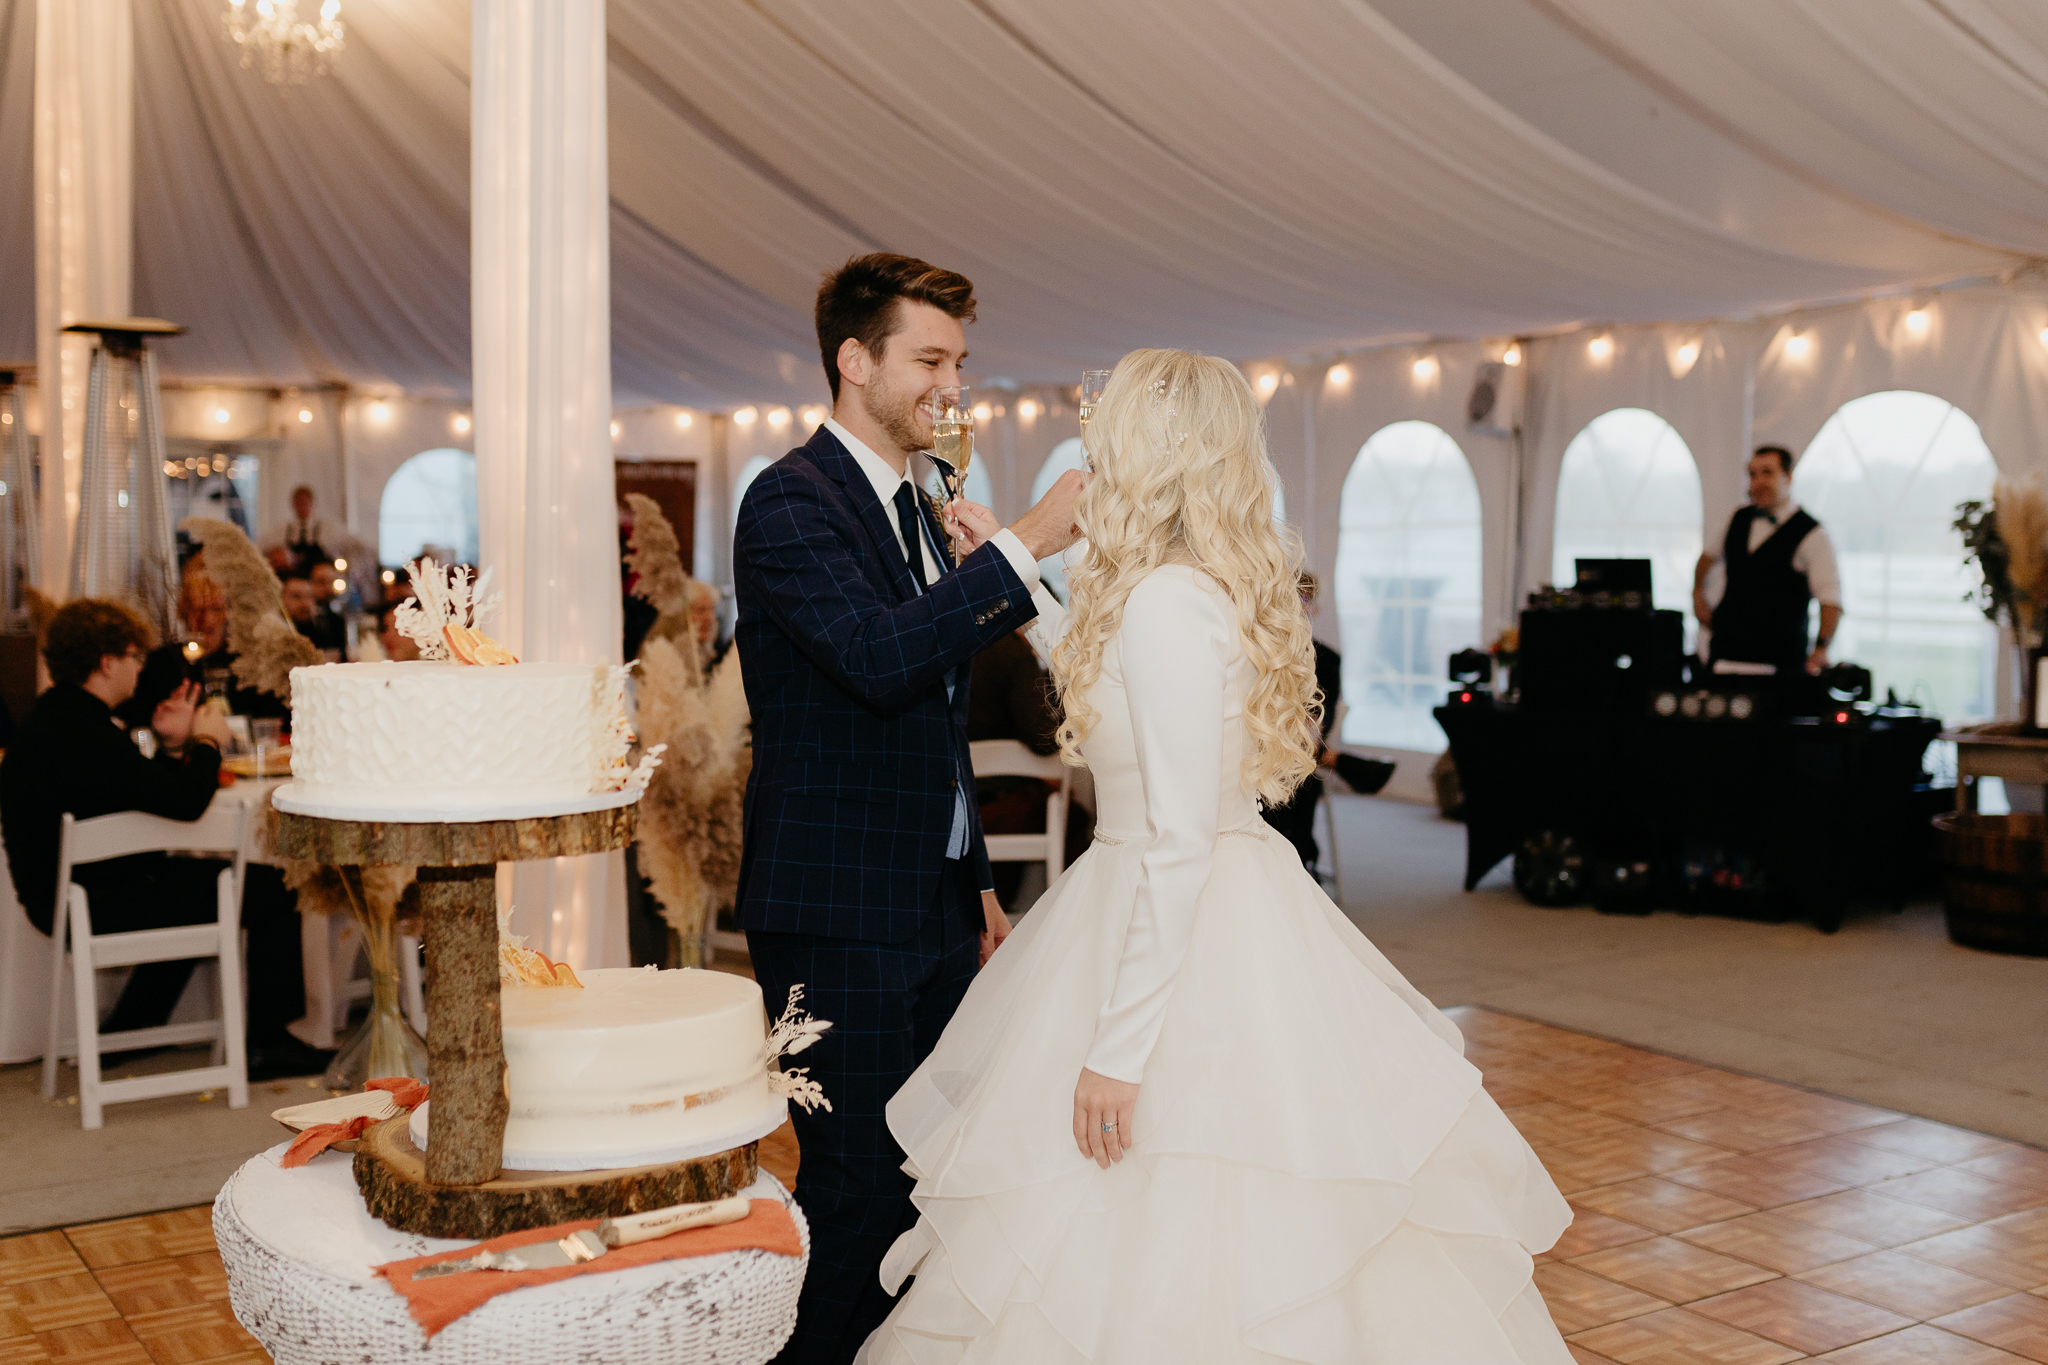 Bride and groom toast champagne in a white tent during their October wedding reception